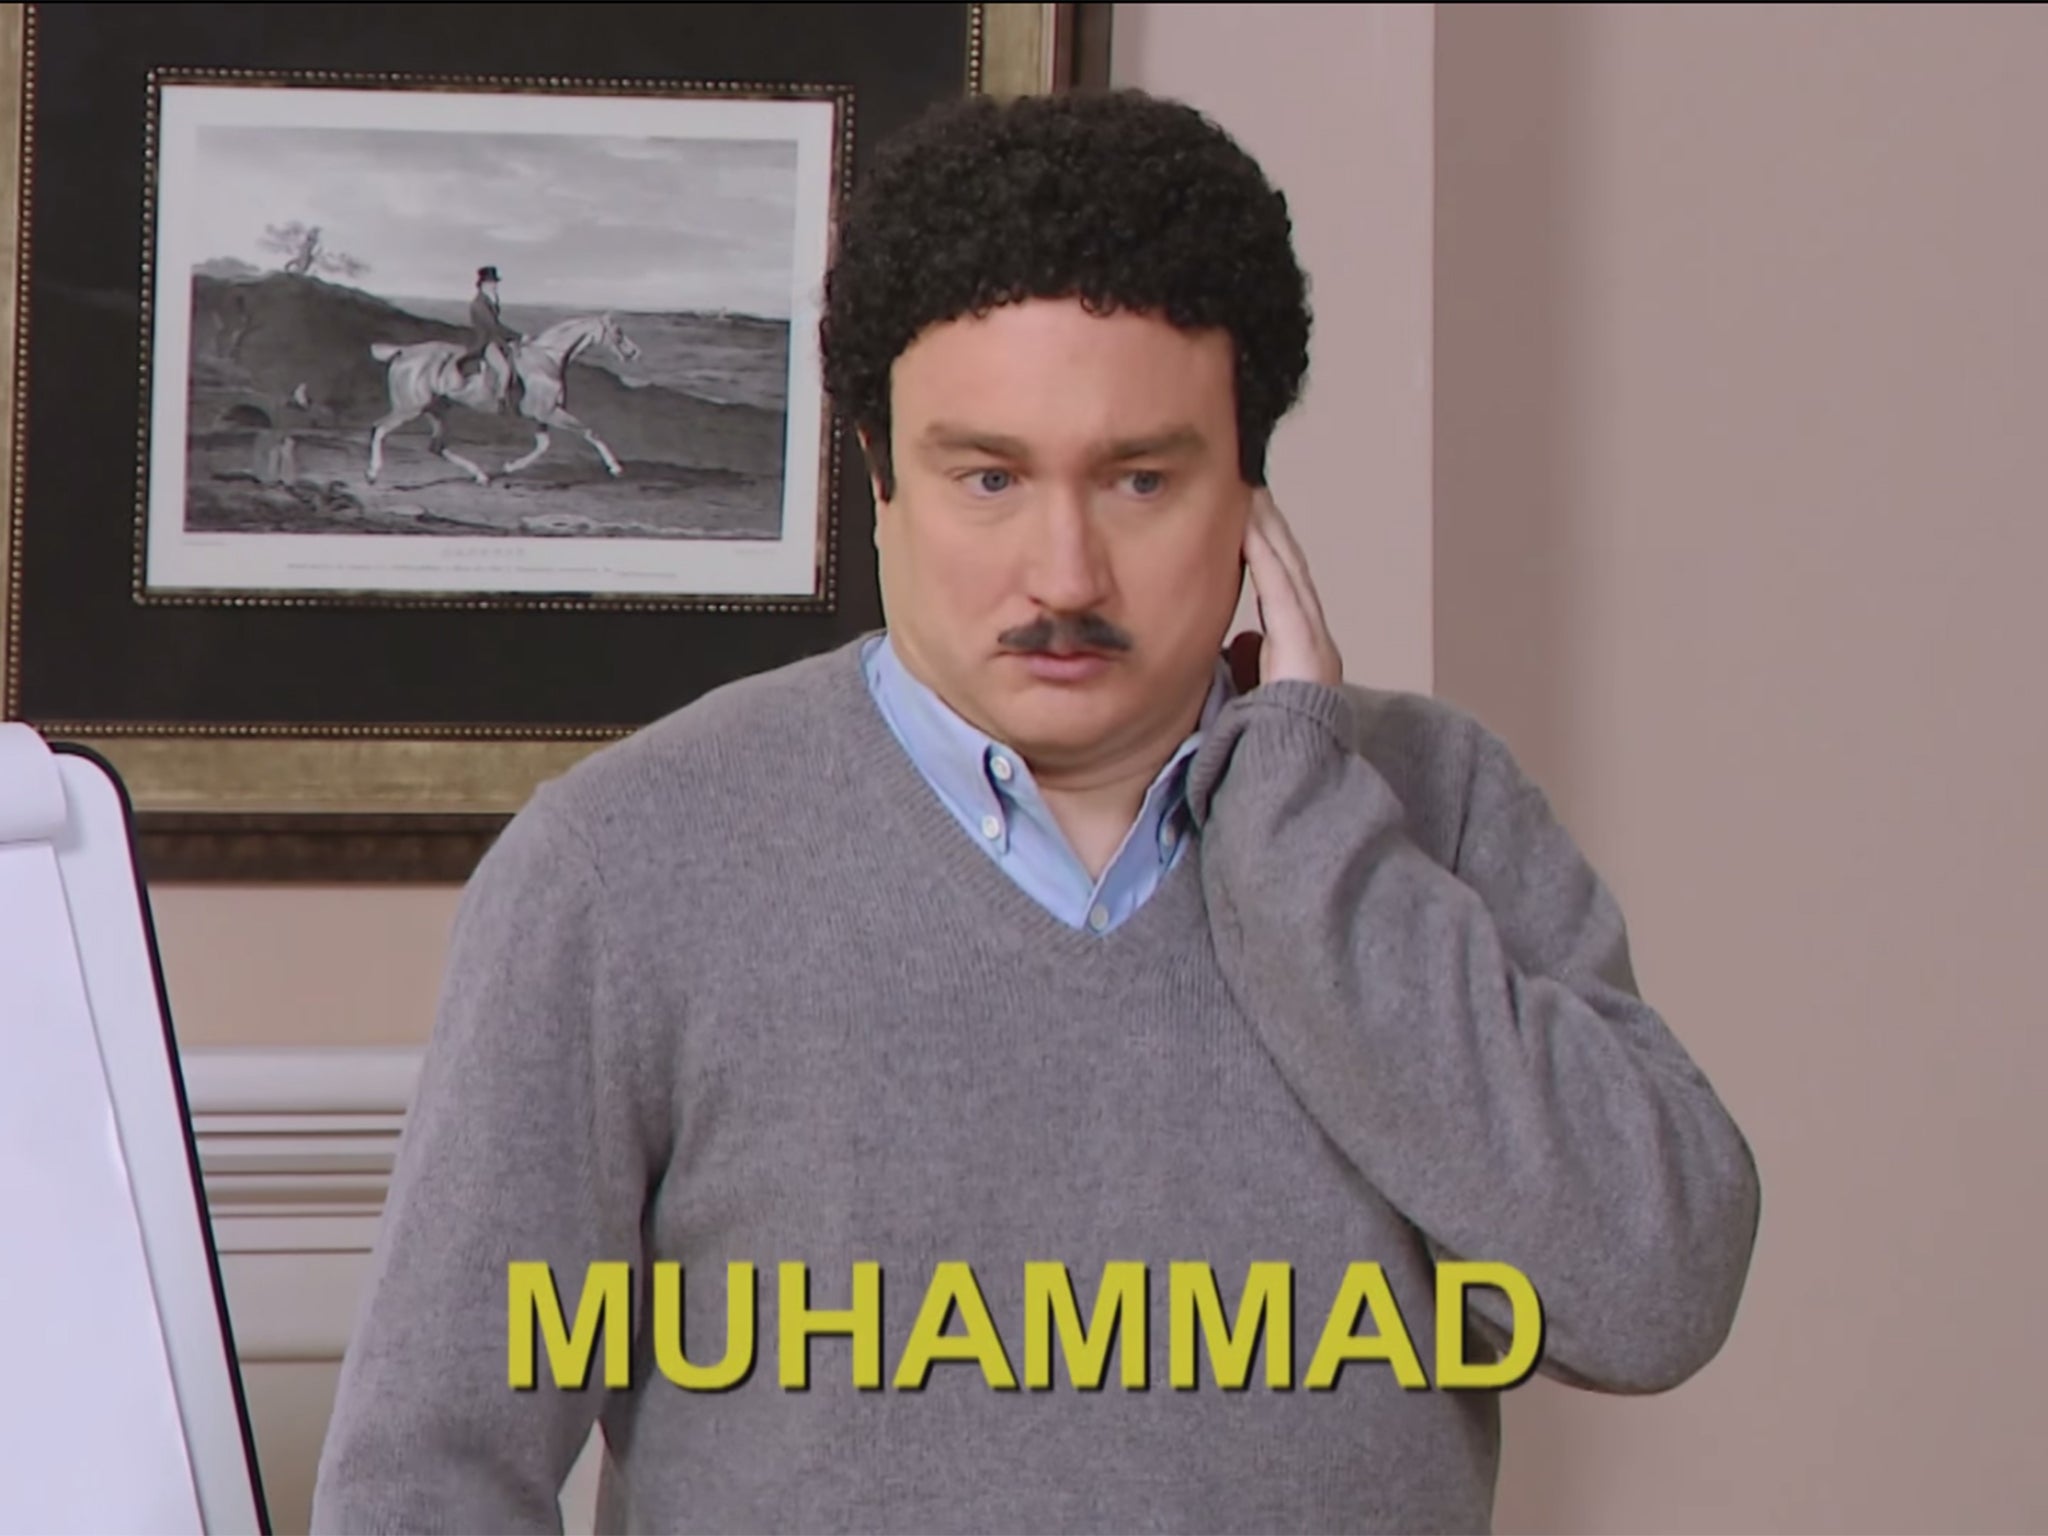 Mark Critch asked to draw Muhammad in a sketch remarkably similar to one seen on Saturday Night Live